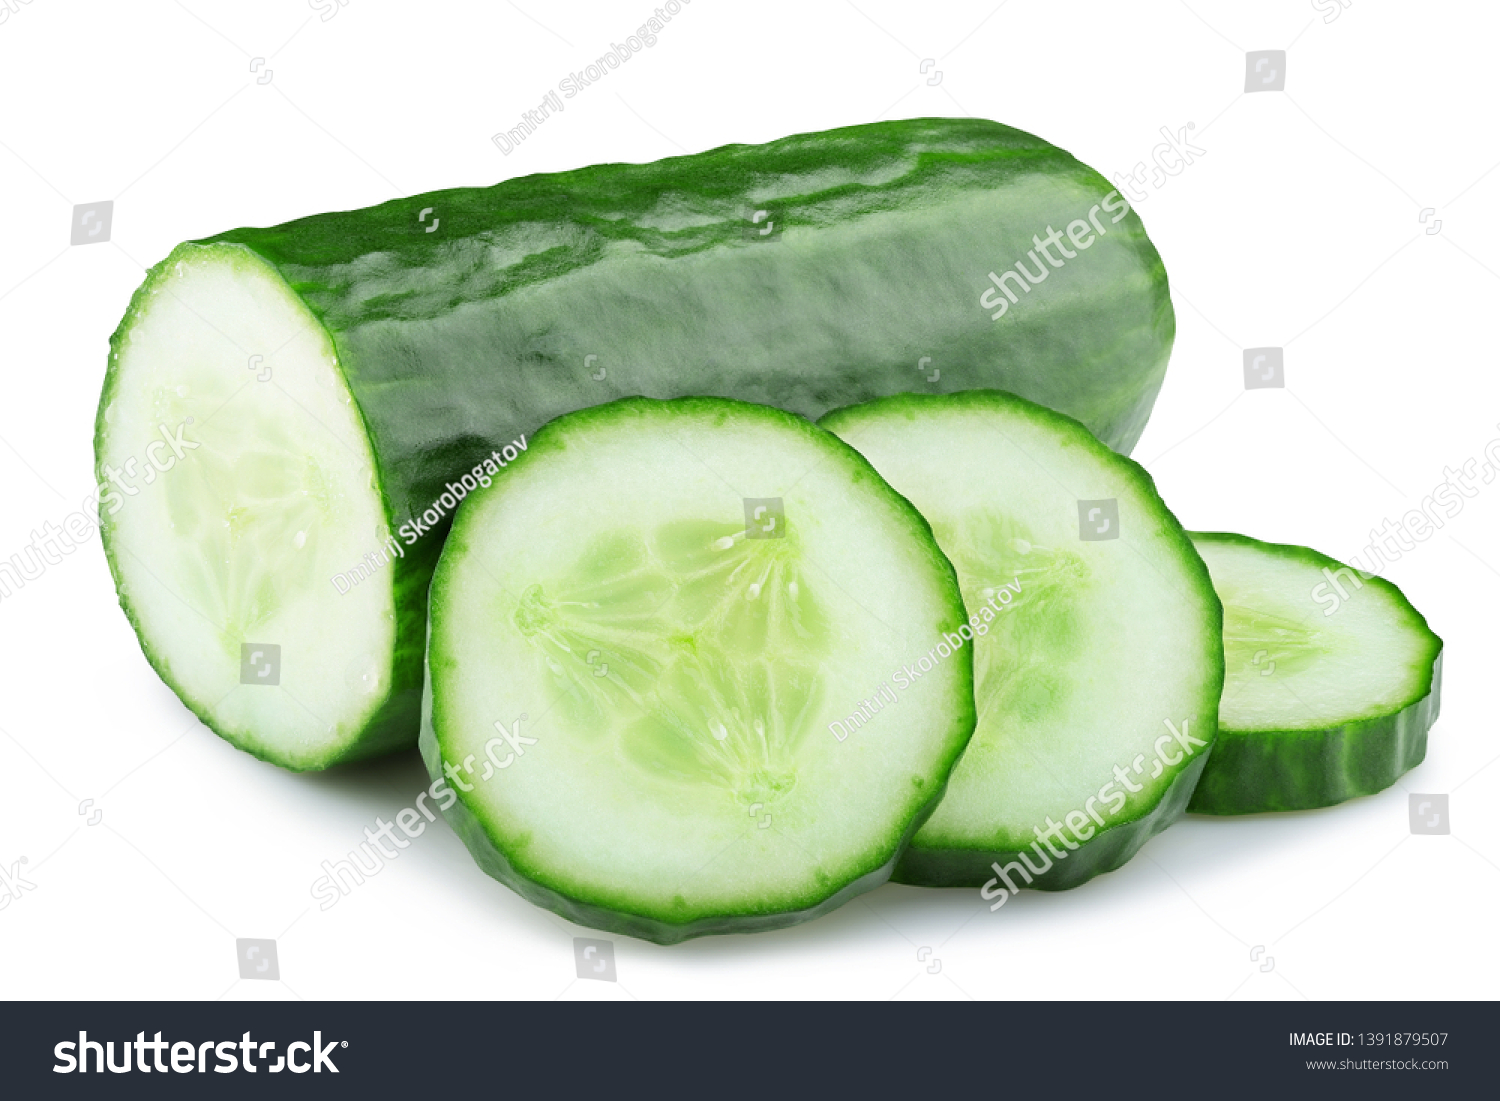 ripe cucumber isolated on white background clipping path #1391879507